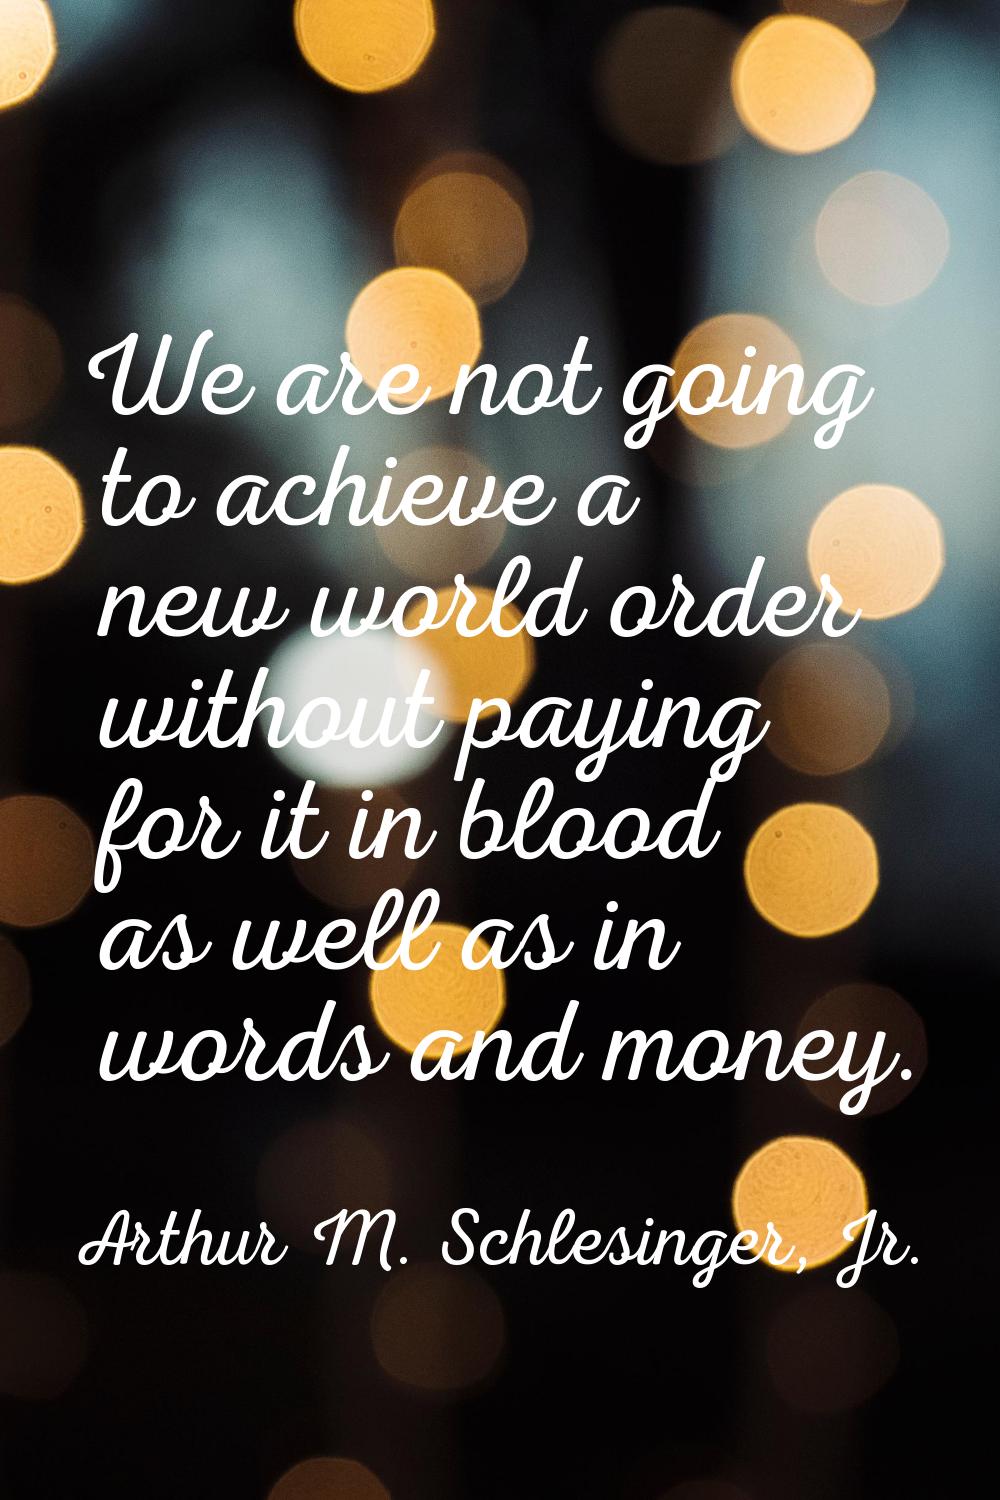 We are not going to achieve a new world order without paying for it in blood as well as in words an